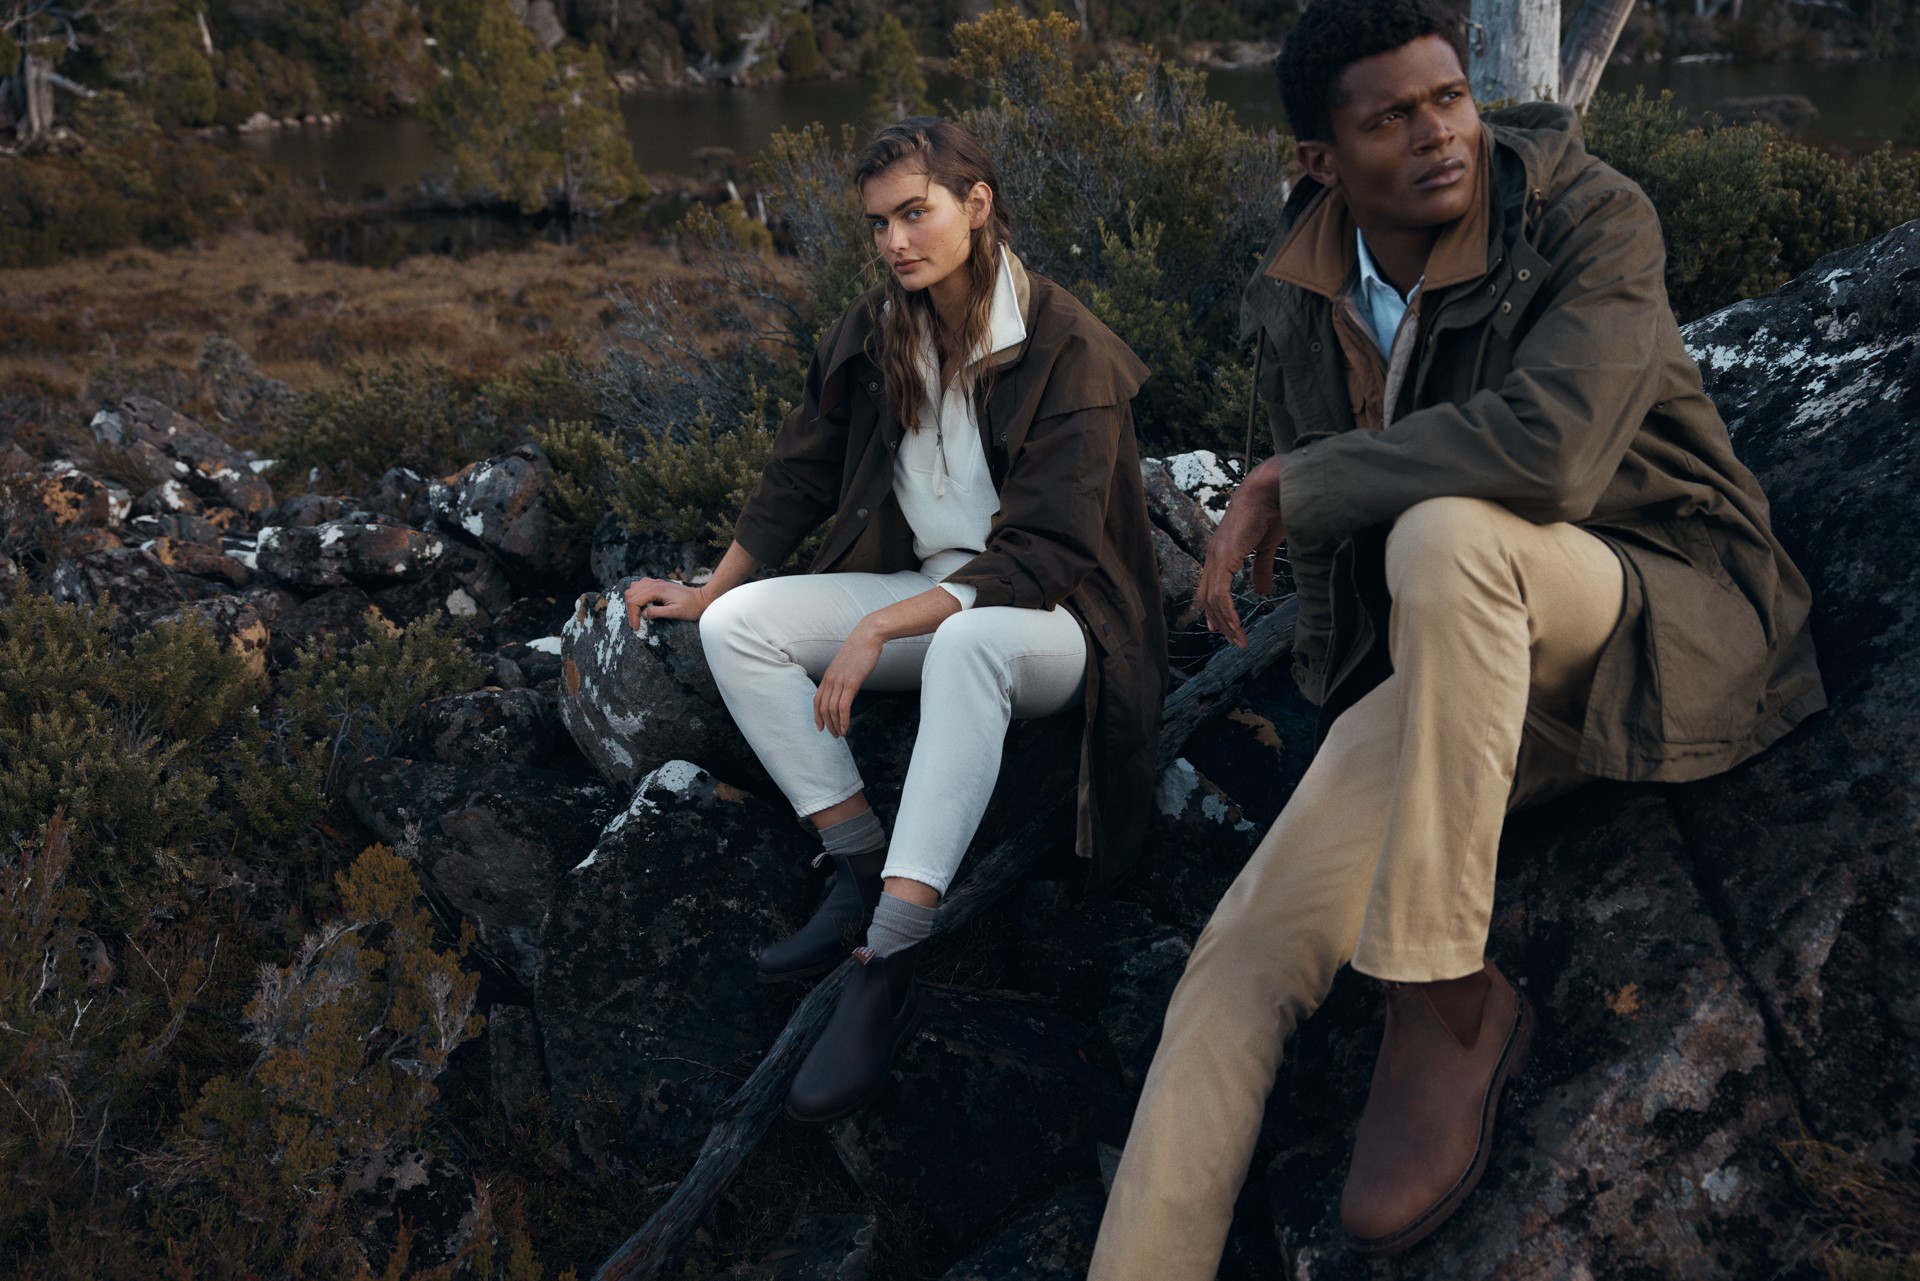 R.M Williams launches the layers with new winter collection